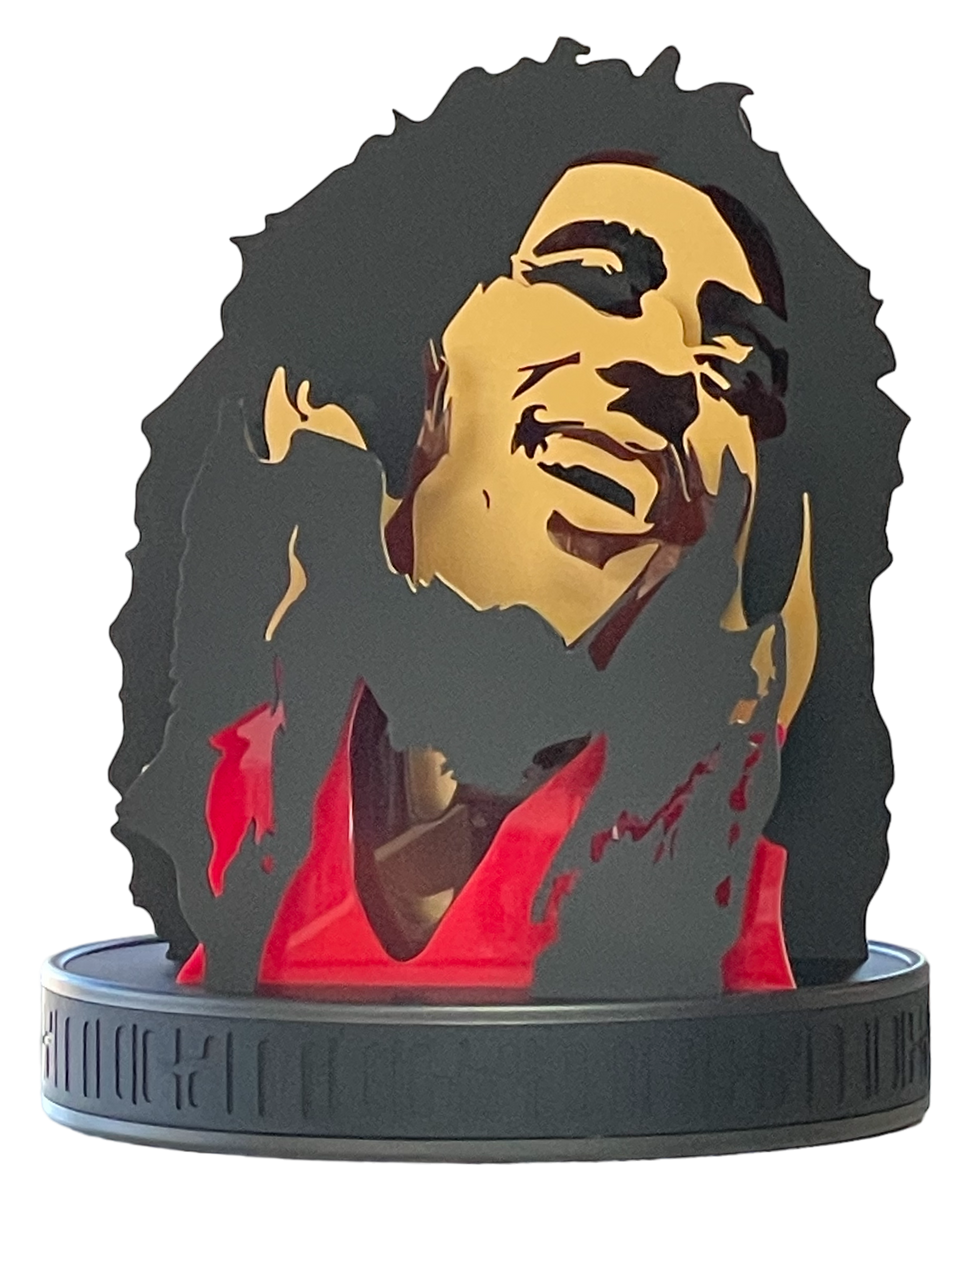 Bob Marley "One Love" Licensed 3D Sculpture, Limited Edition of 500